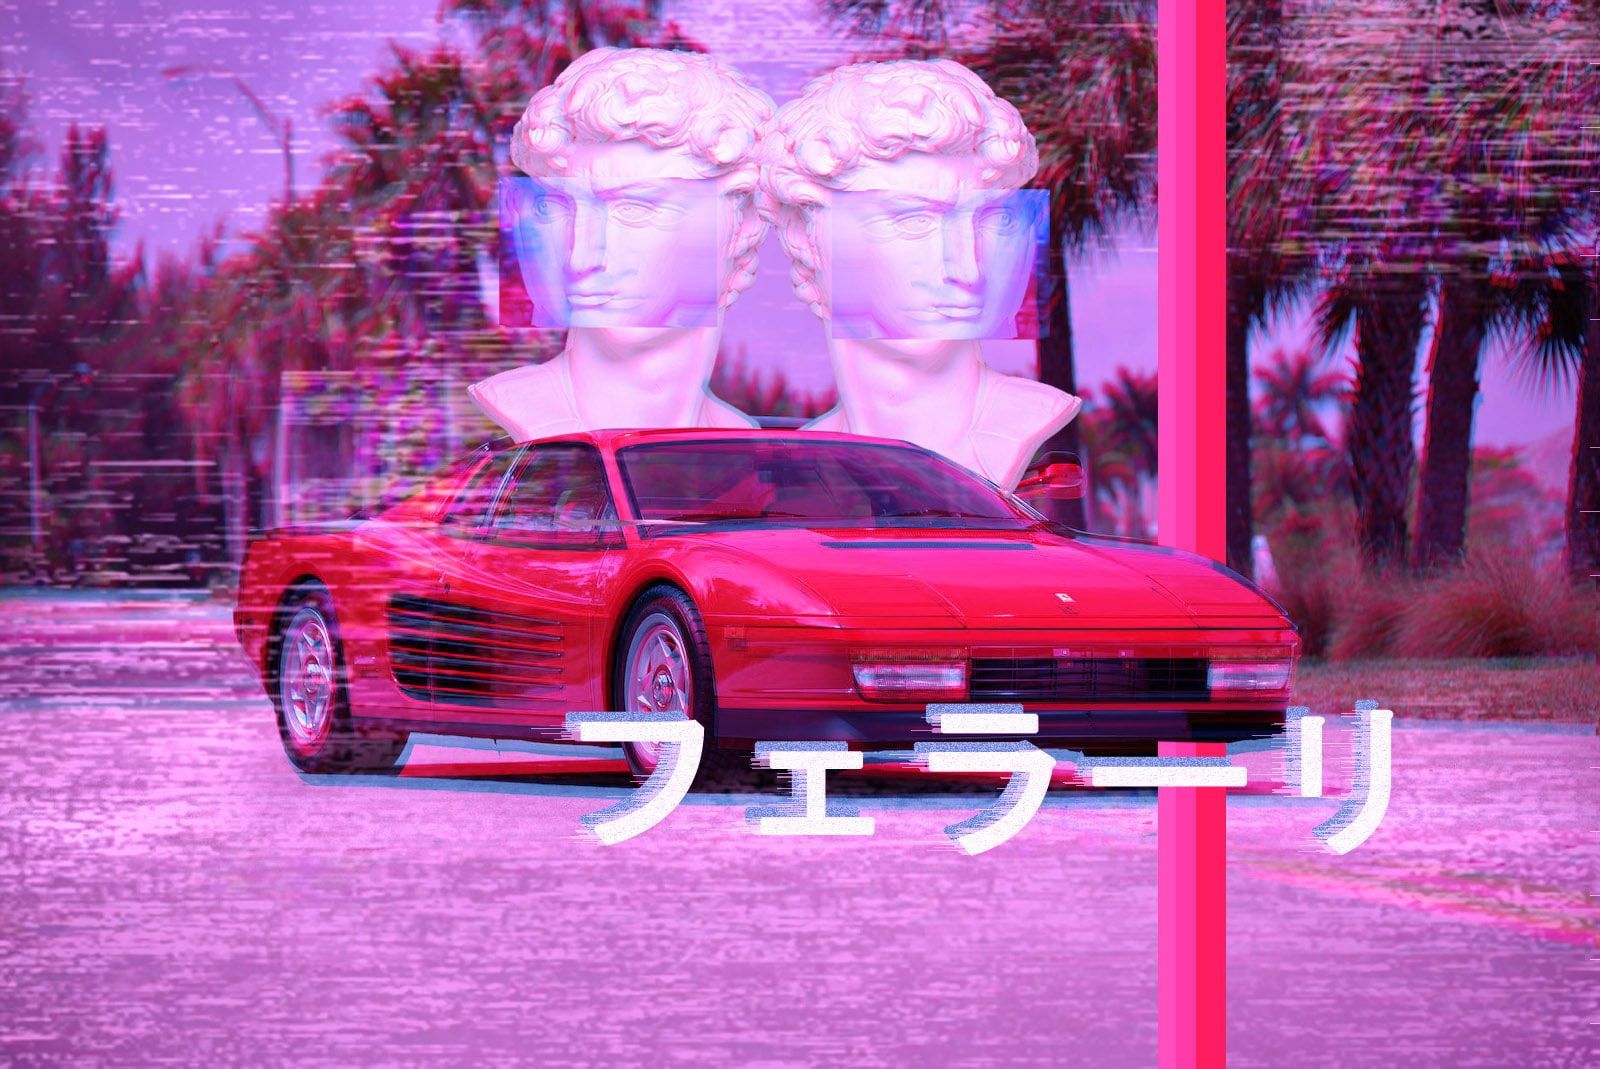 A red car with two heads on it - 80s, VHS